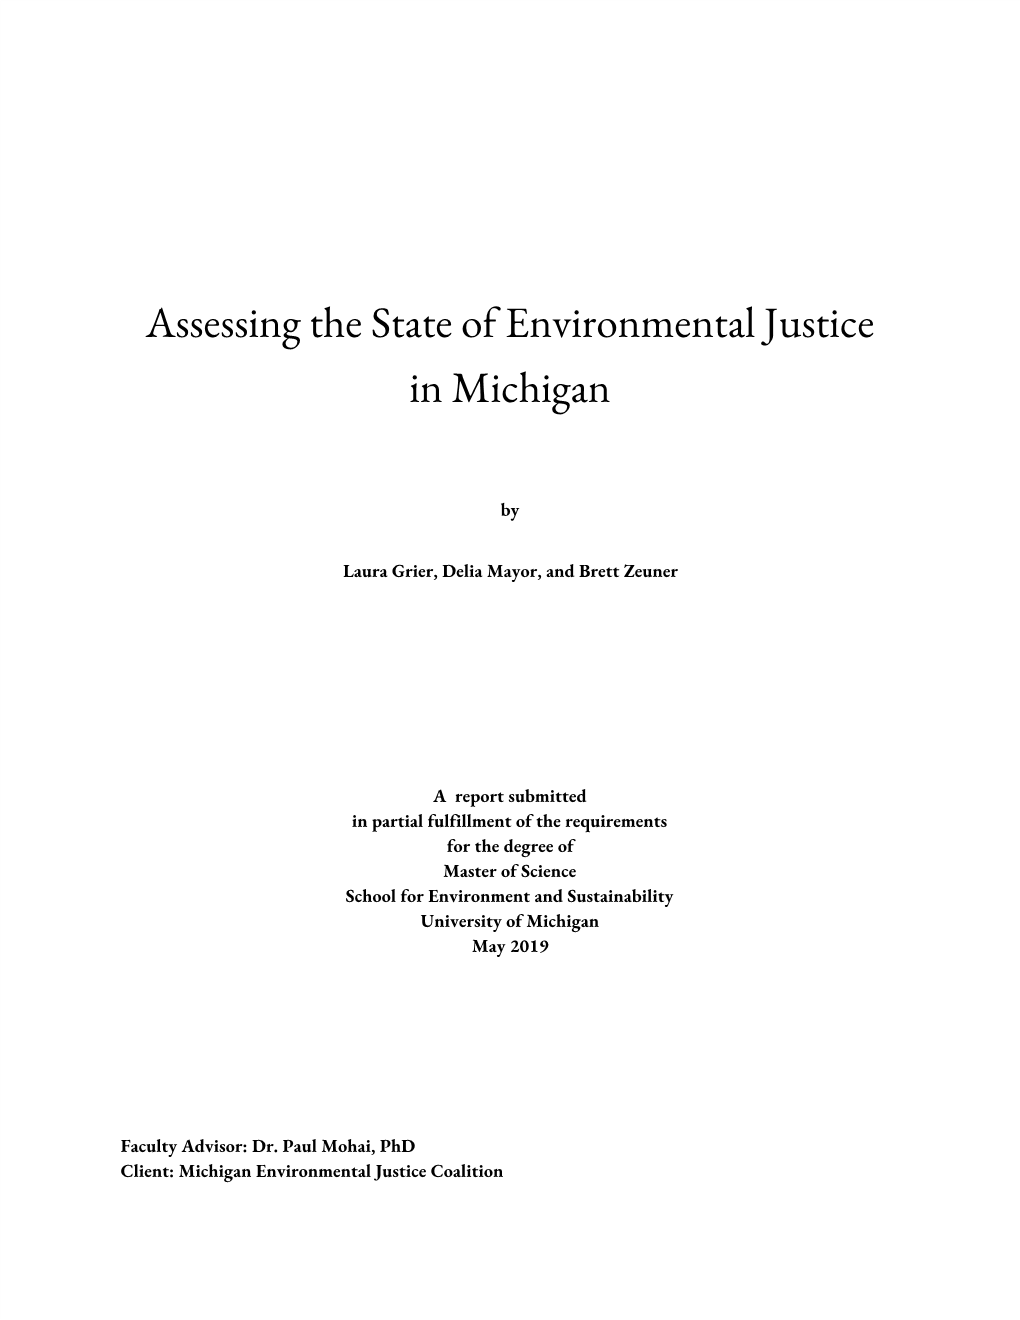 Assessing the State of Environmental Justice in Michigan